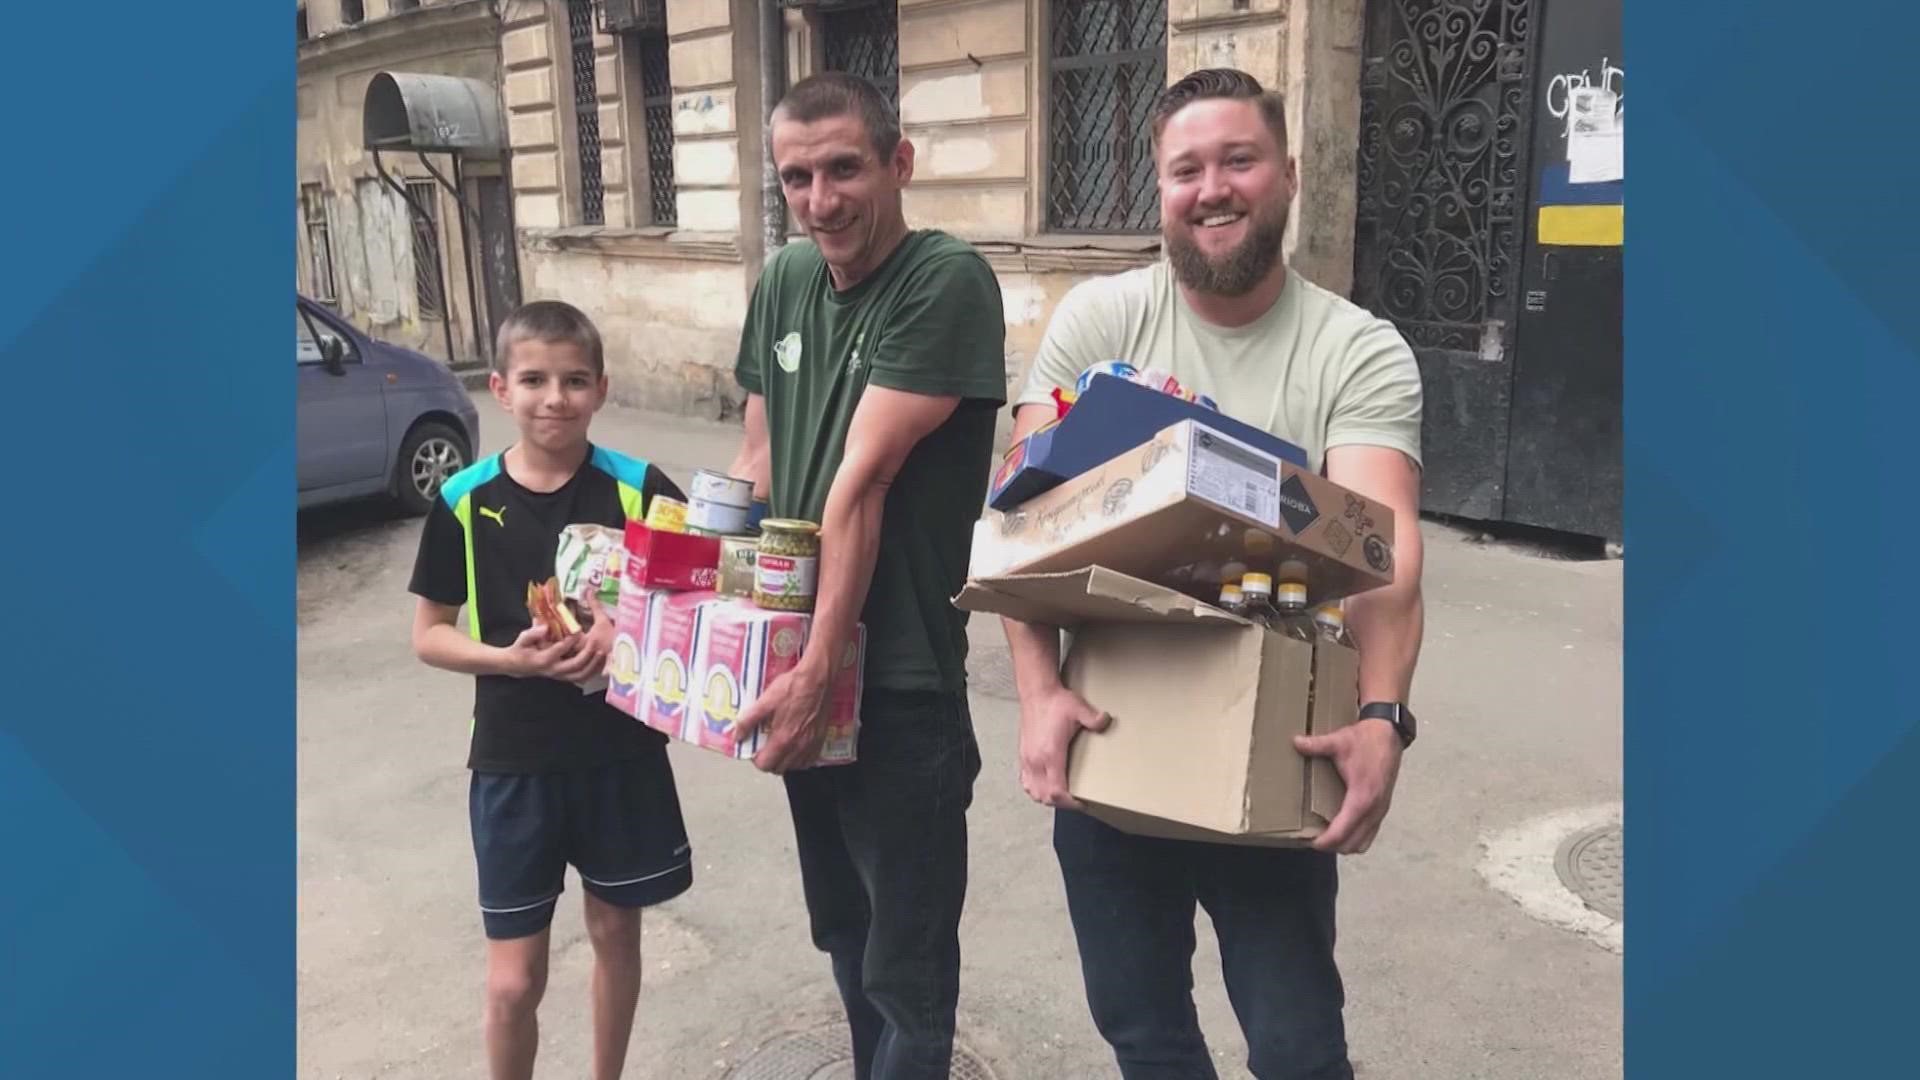 The Backroads Foundation has delivered more than 50,000 pounds of combat gear, food, clothes, and medicine to people in need across Ukraine since the war broke out.